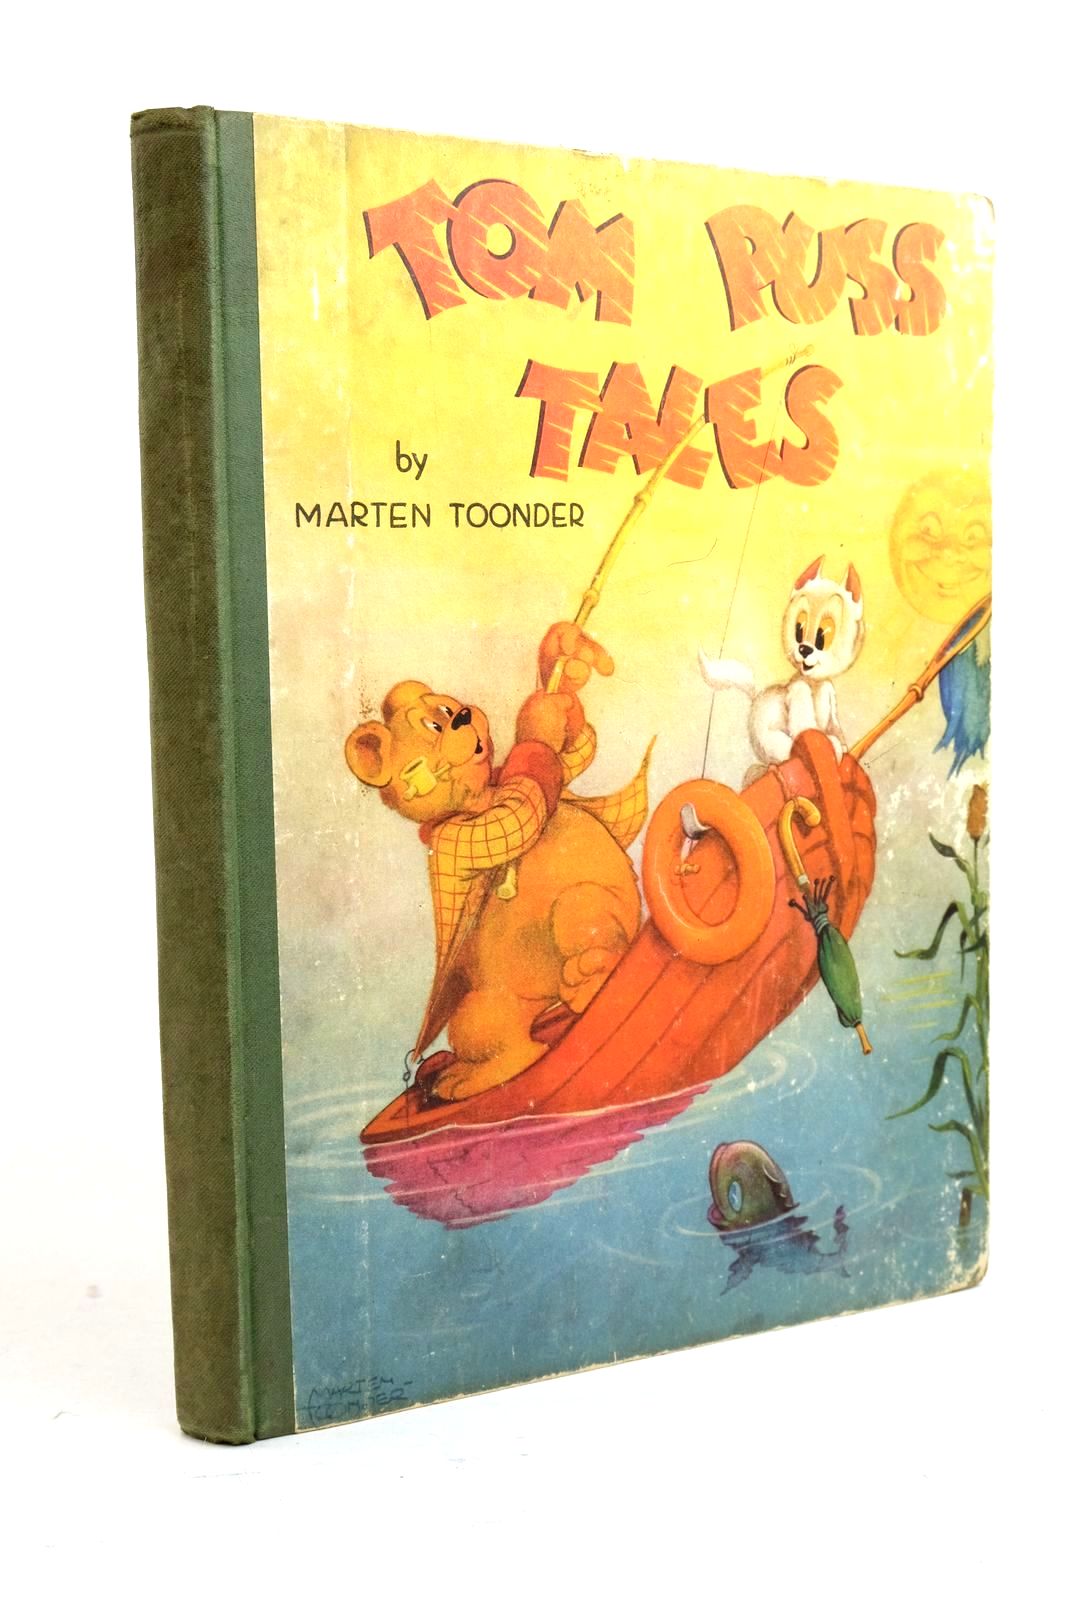 Photo of TOM PUSS TALES written by Toonder, Marten illustrated by Toonder, Marten published by Birn Brothers Ltd. (STOCK CODE: 1321108)  for sale by Stella & Rose's Books